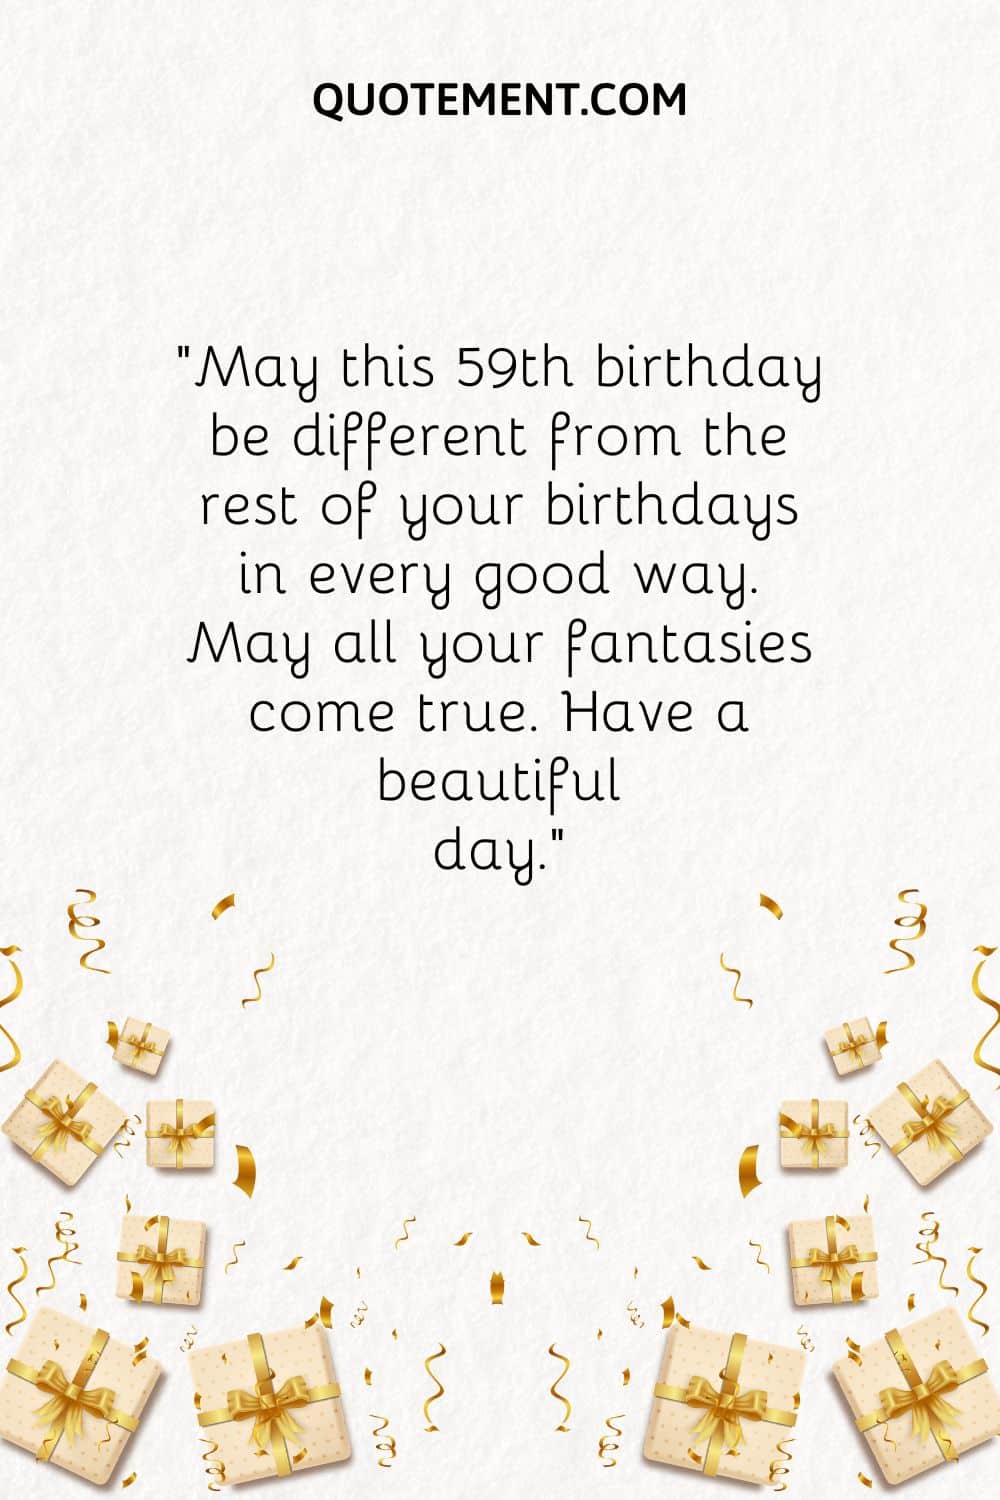 May this 59th birthday be different from the rest of your birthdays in every good way